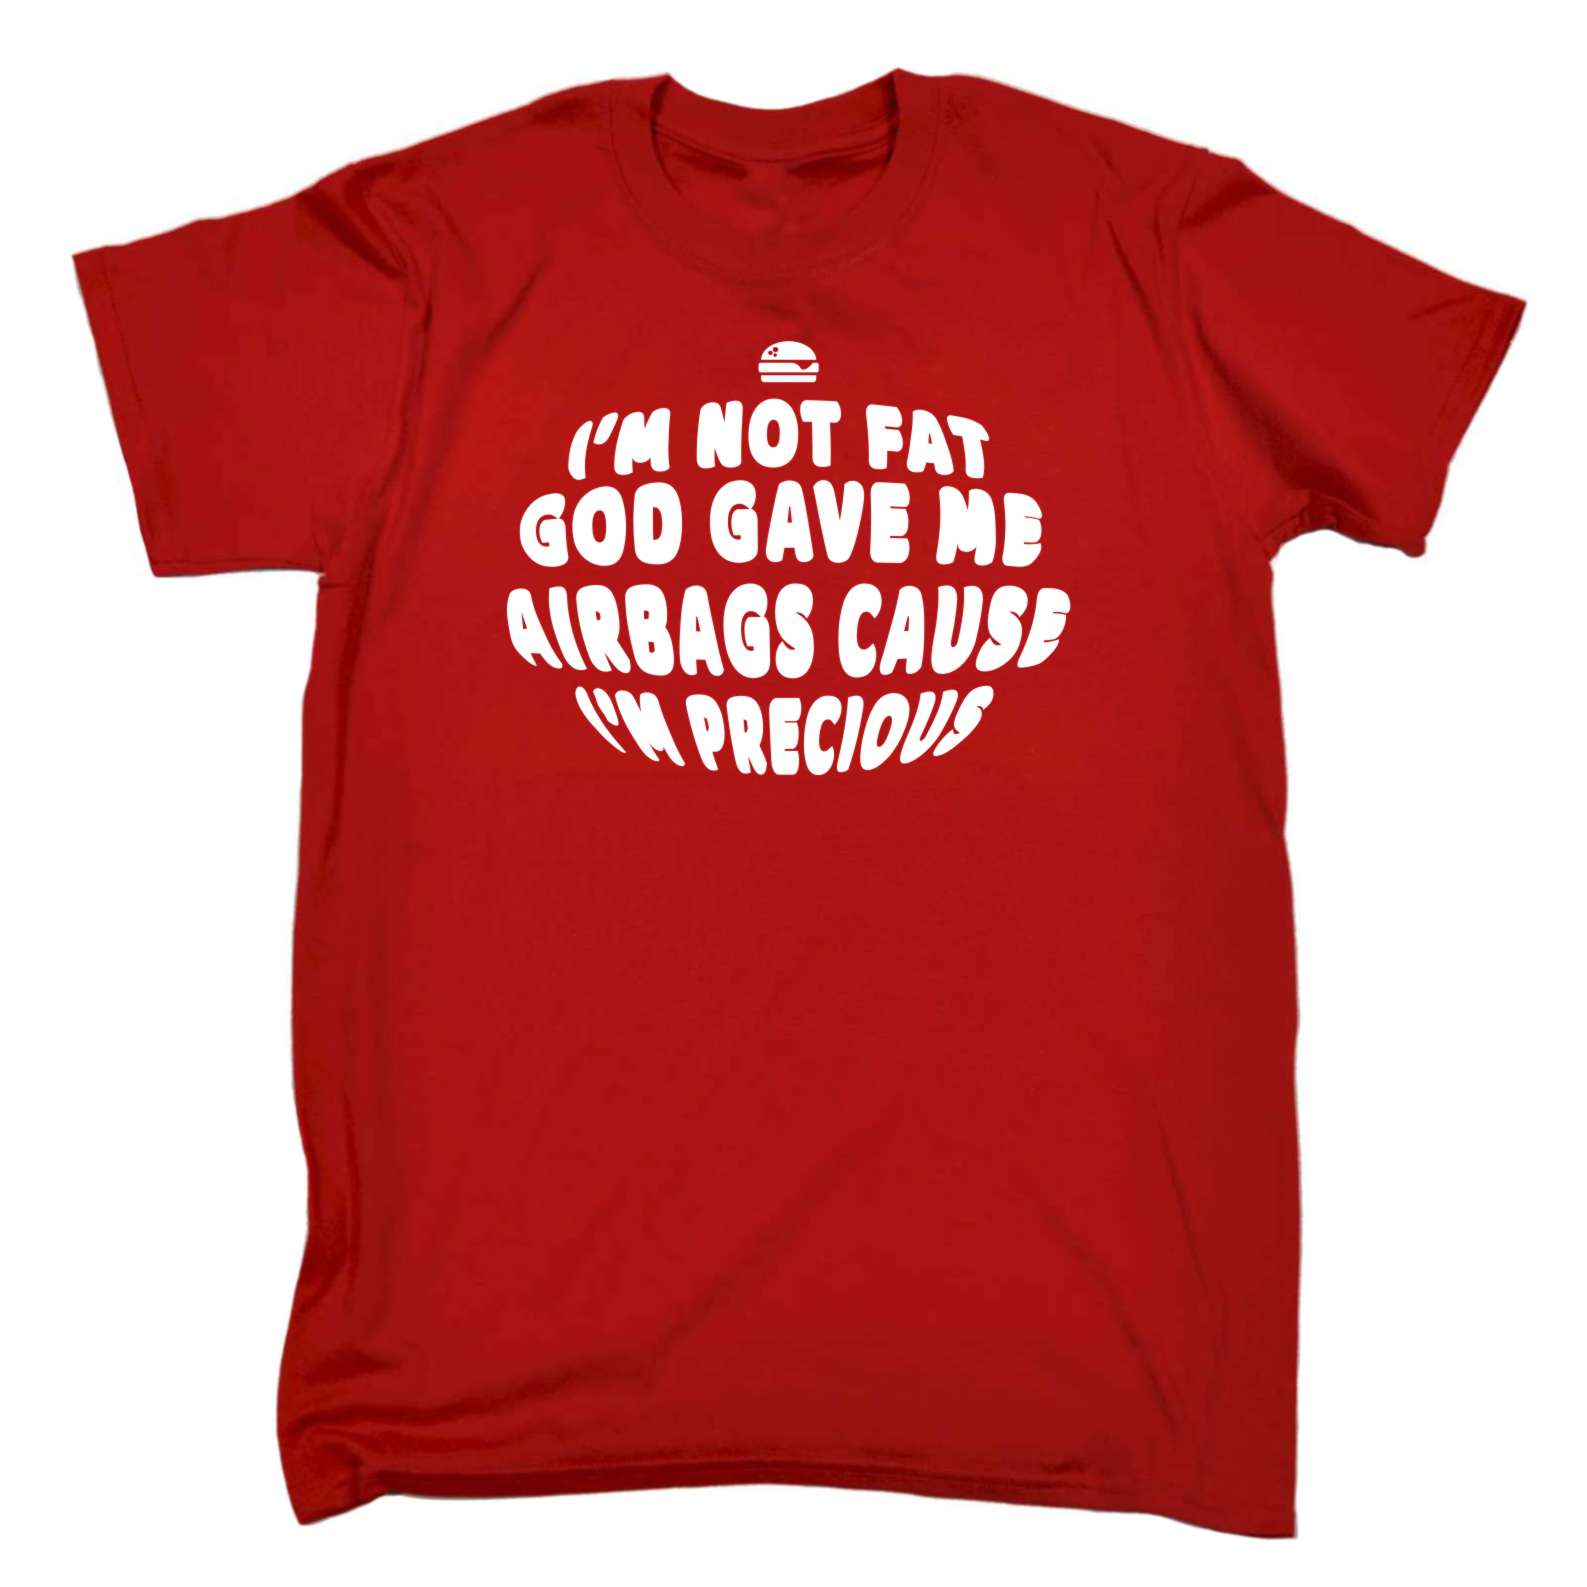 Men's Im Not Fat God Gave Me Airbags Funny Joke Plus Sized Humour T ...